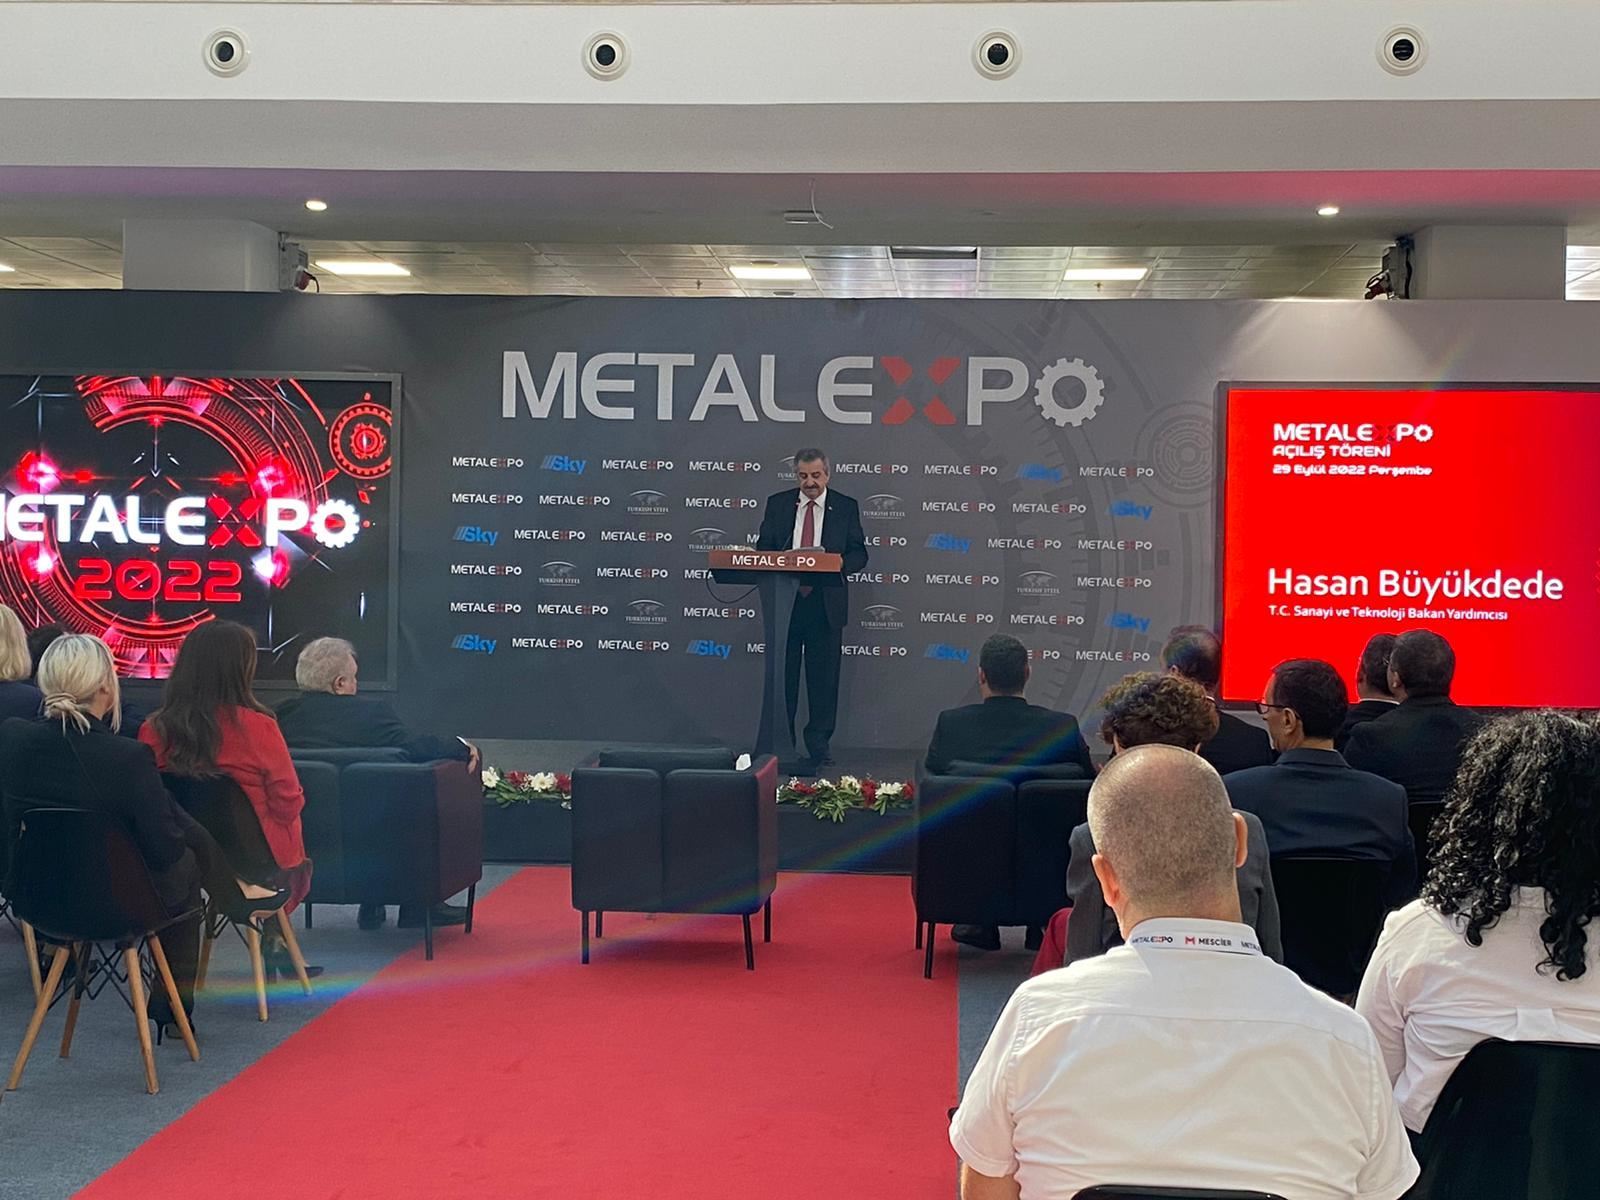 2nd day at Metal EXPO Istanbul: “We stand by all industrialists”